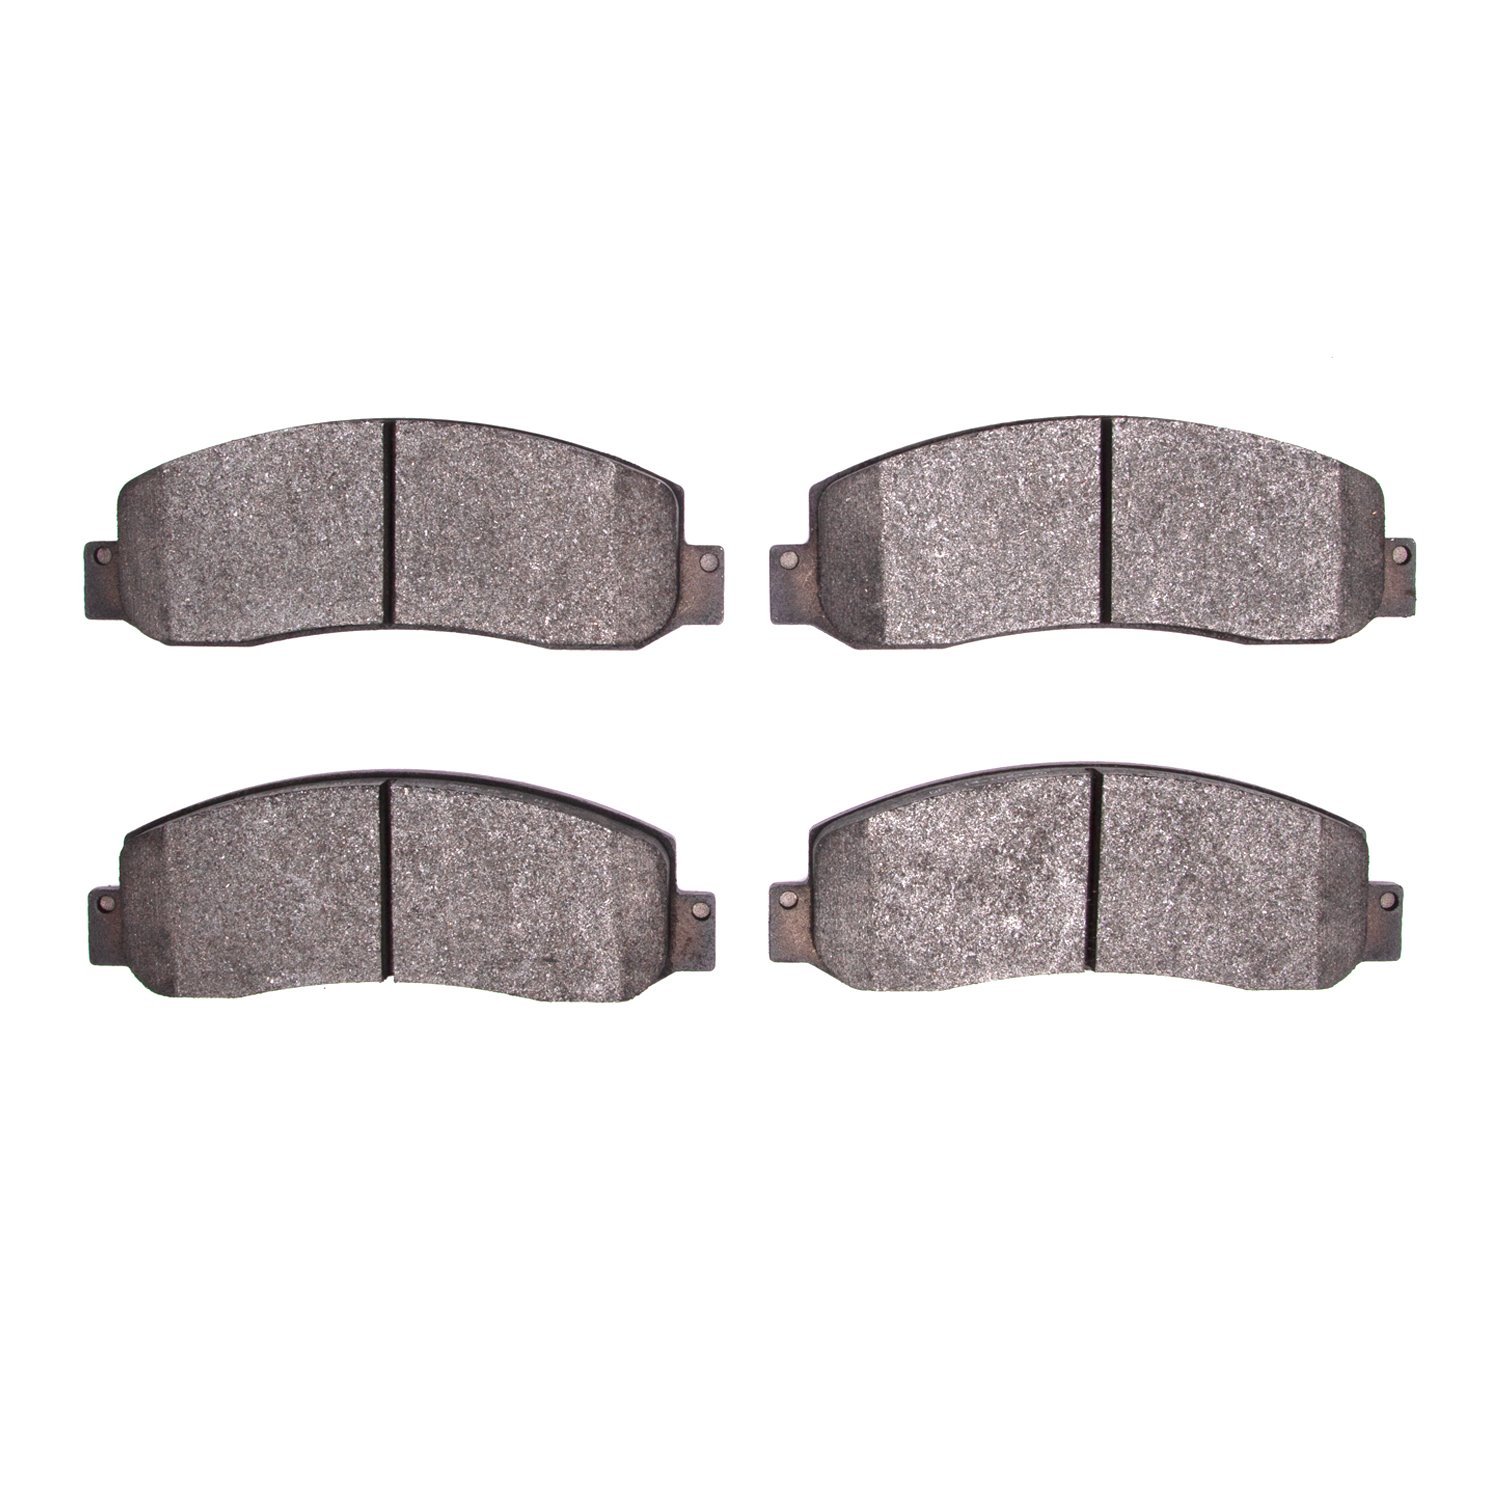 Super-Duty Brake Pads, 2005-2012 Ford/Lincoln/Mercury/Mazda, Position: Front